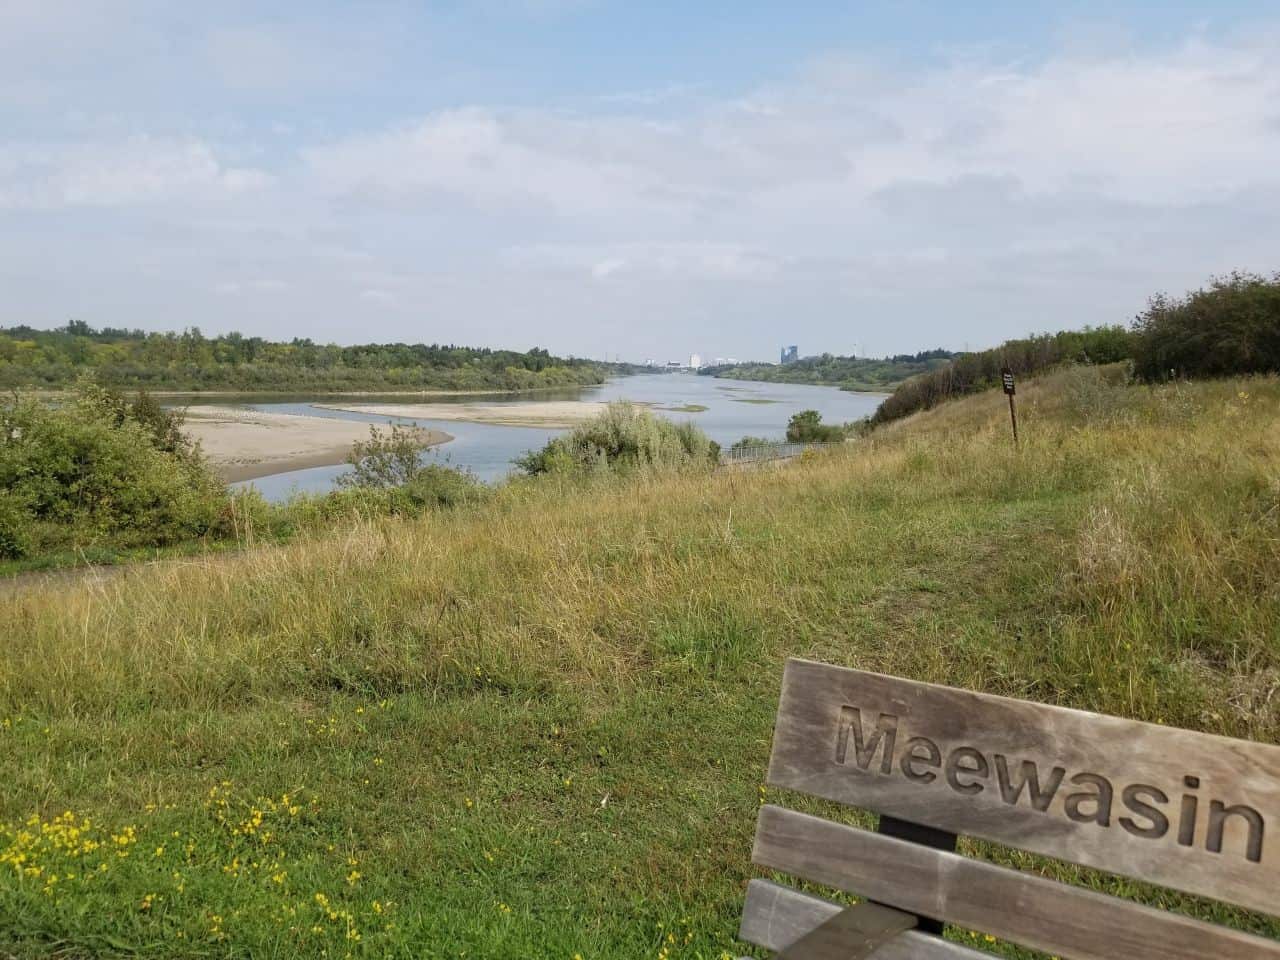 The Meewasin Trail is a paved urban pathway that is well-signed, offers benches, overooks with gorgeous scenery, outdoor art, and all the amenities of a city.